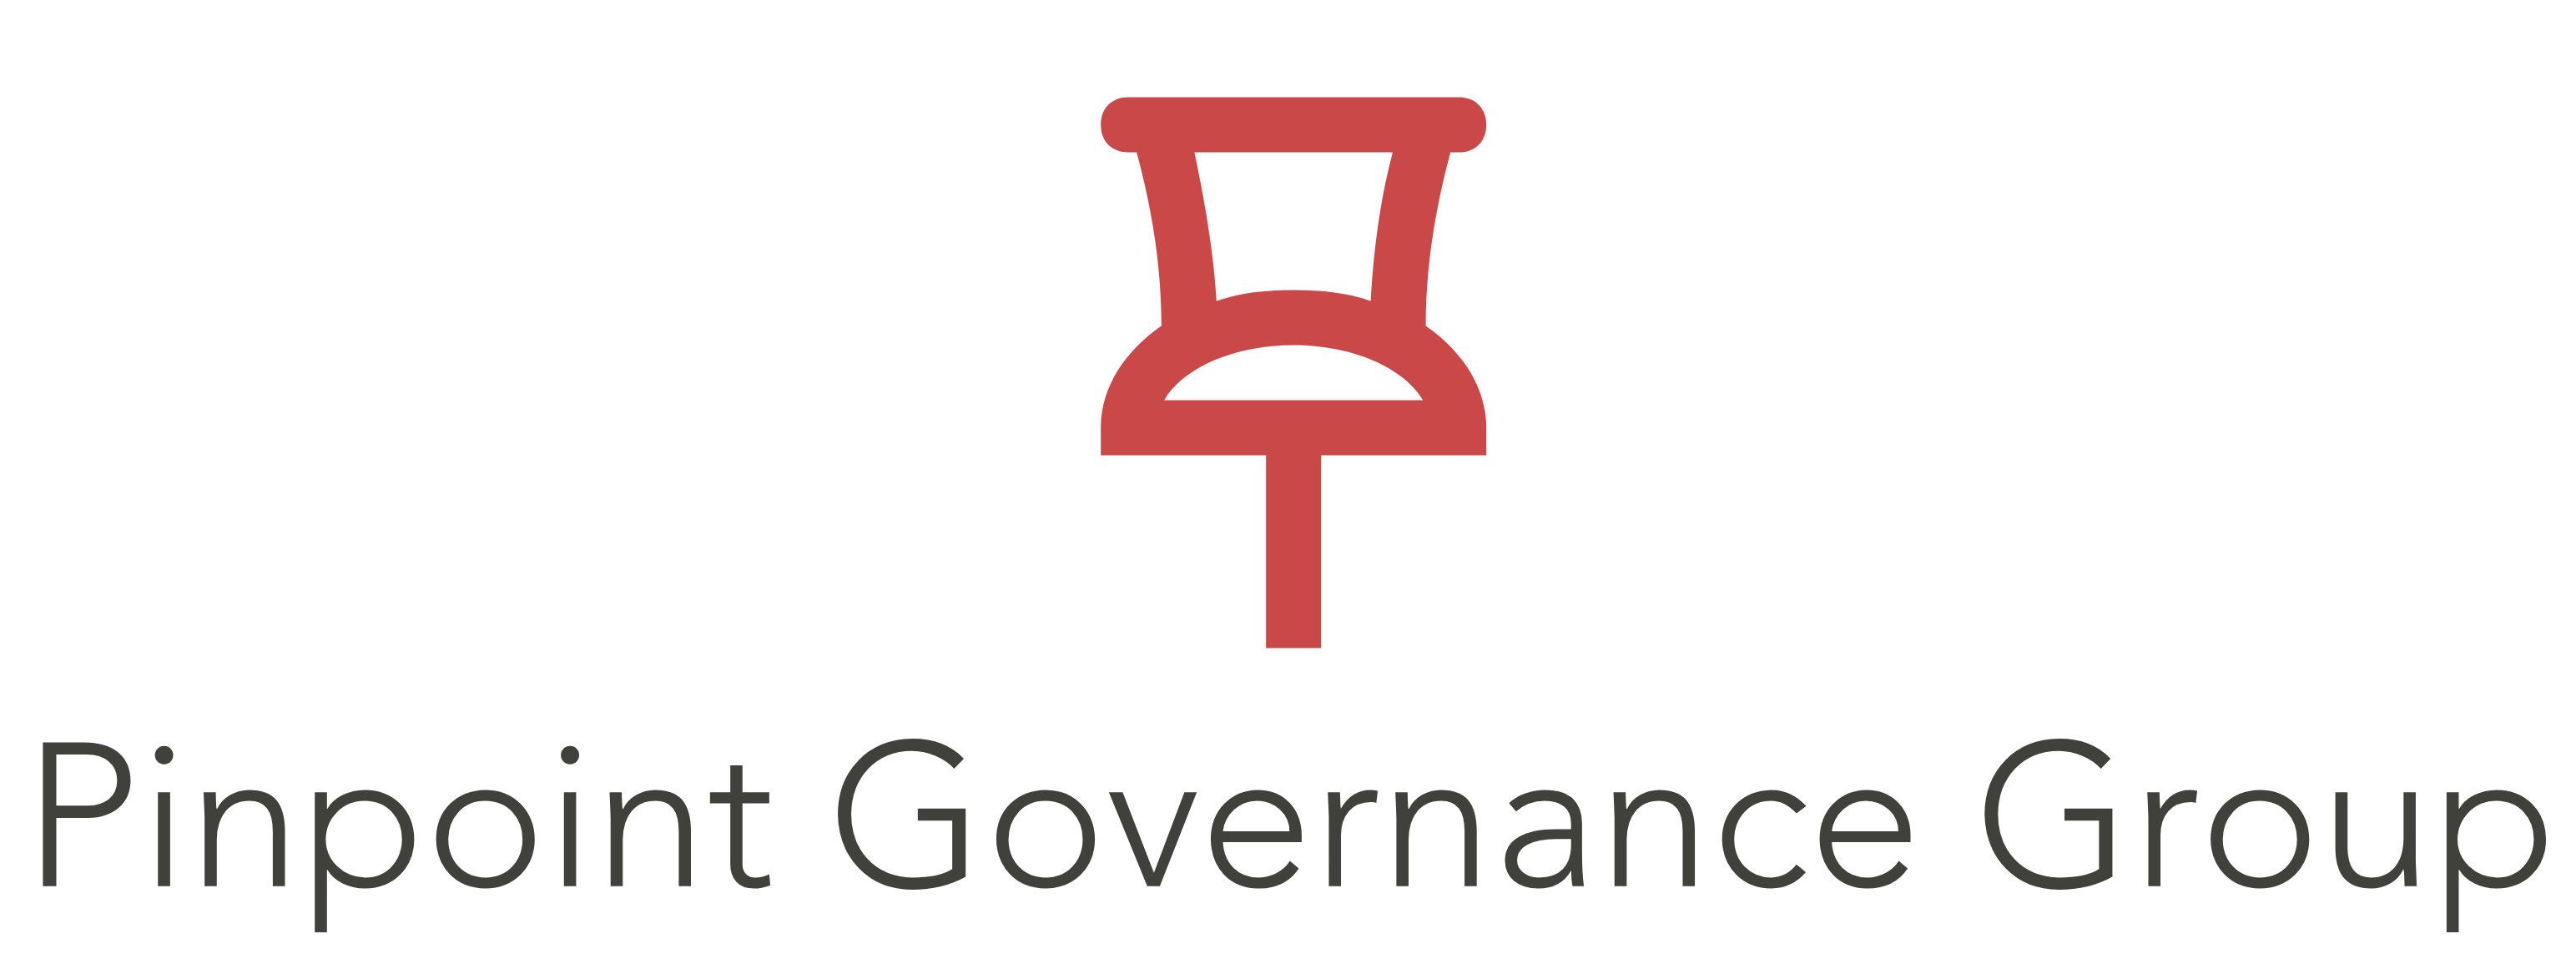 Pinpoint Governance Group